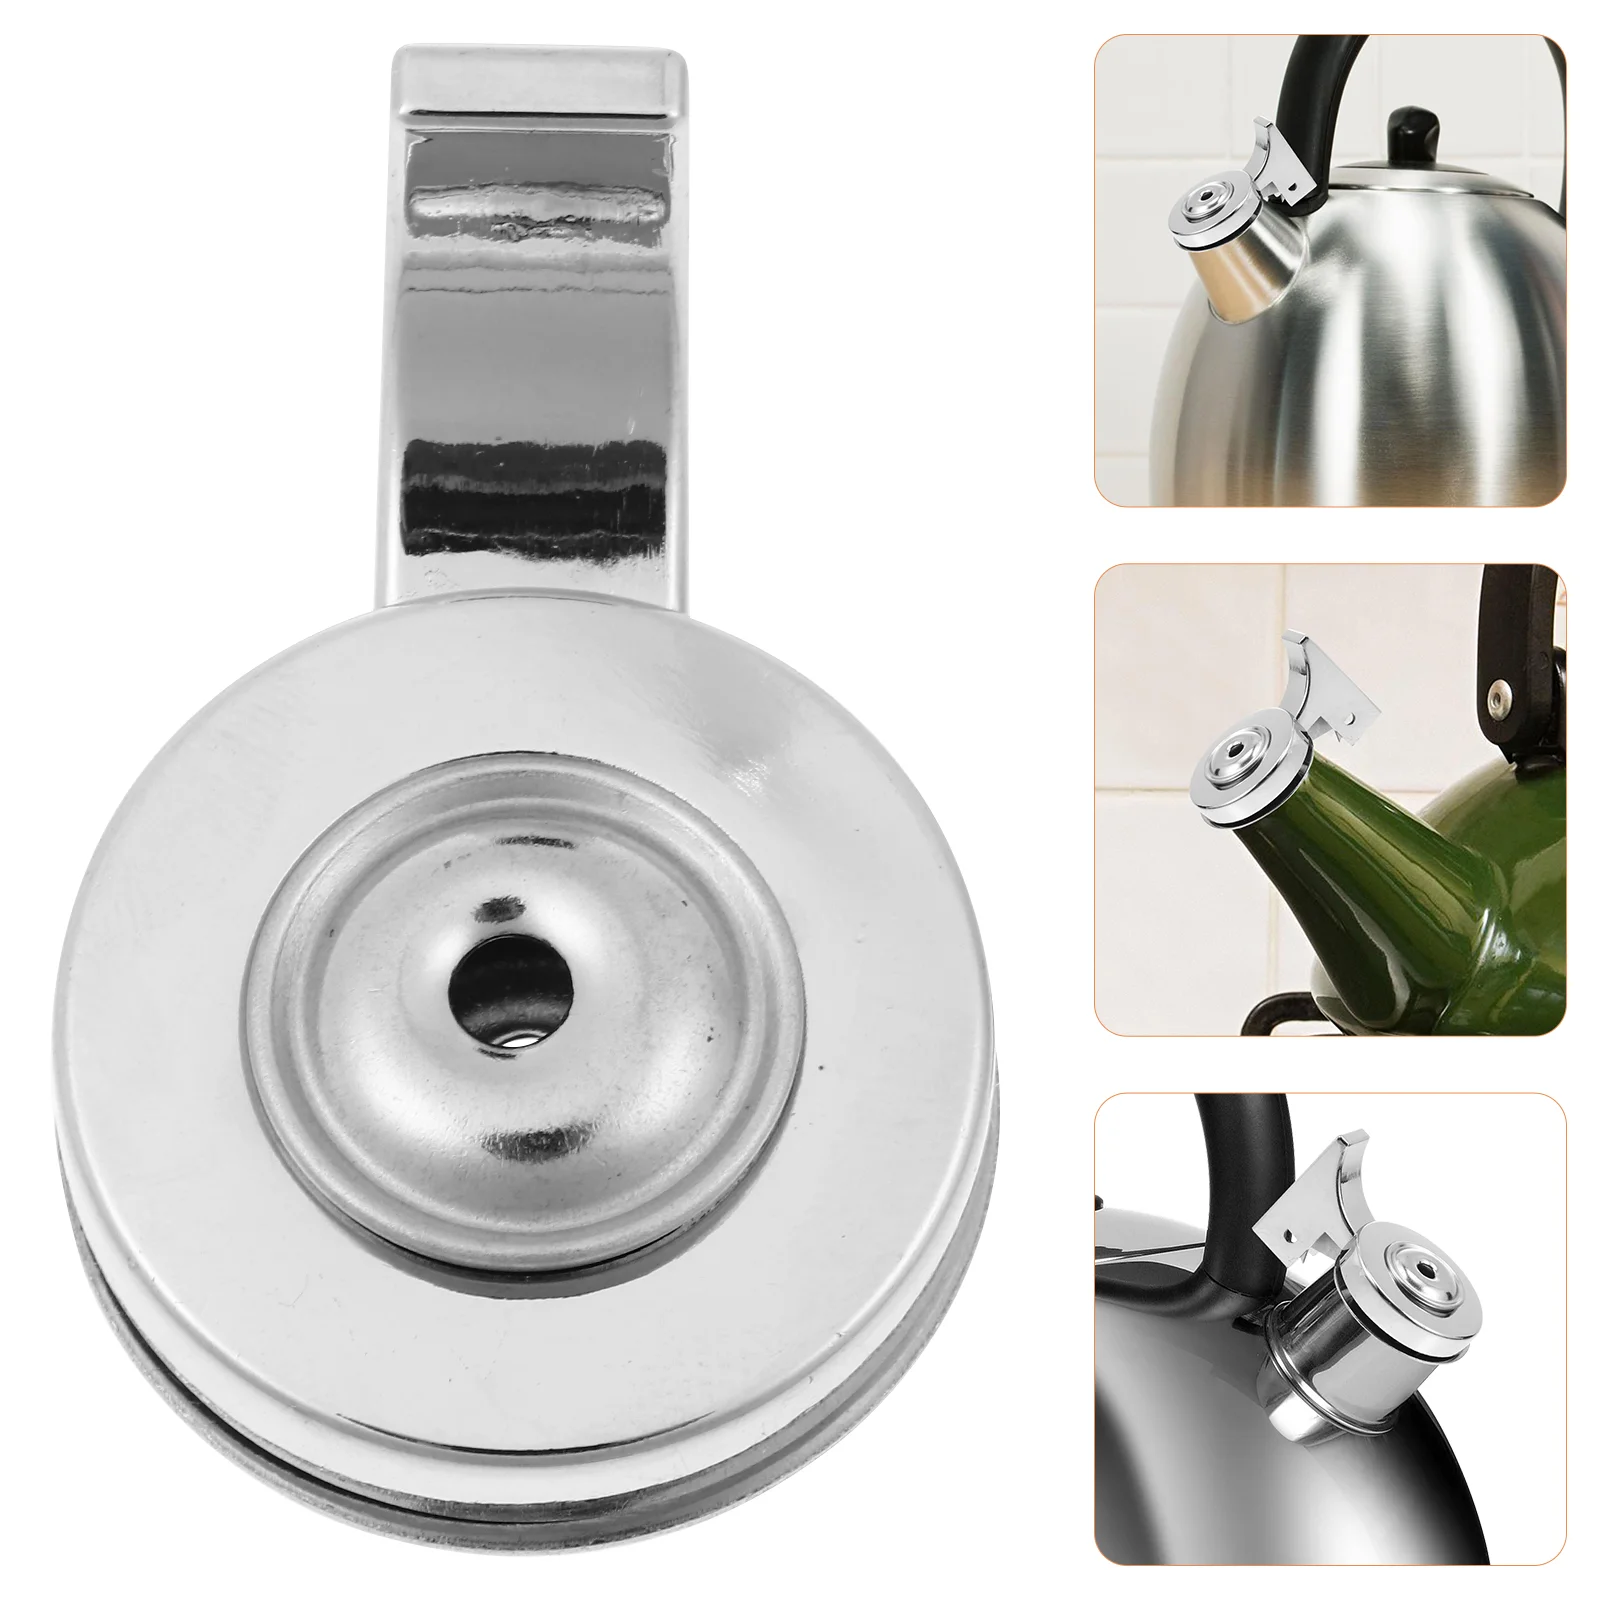 

Metal Water Jug Whistling Kettle Mouth Cap Replace Nozzle Stainless Tea Spout Steel Teapot Tip Beep Replacement